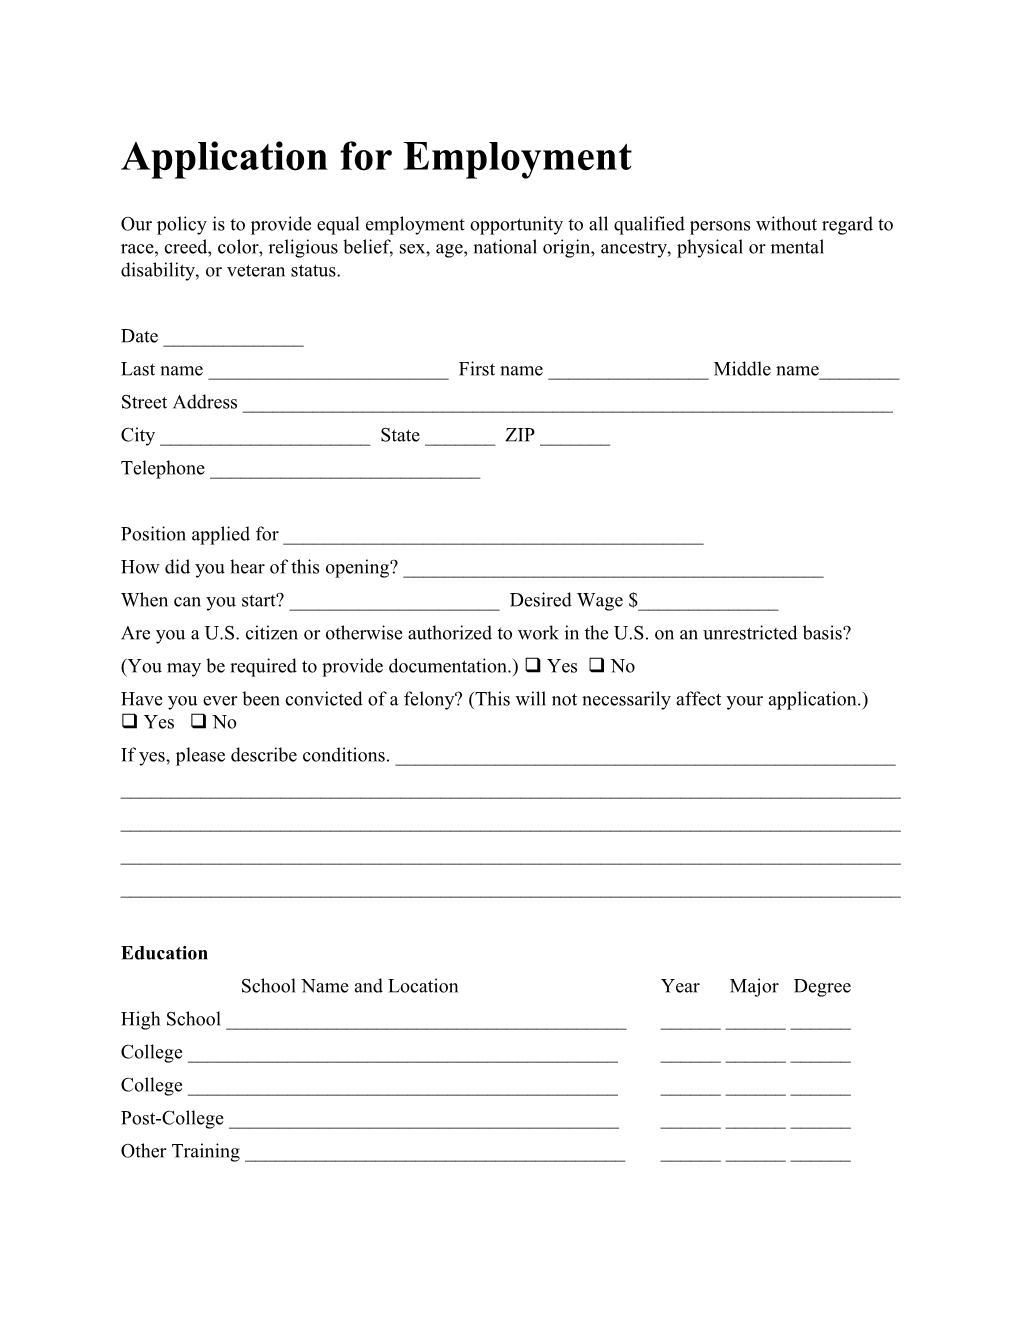 Application for Employment s100